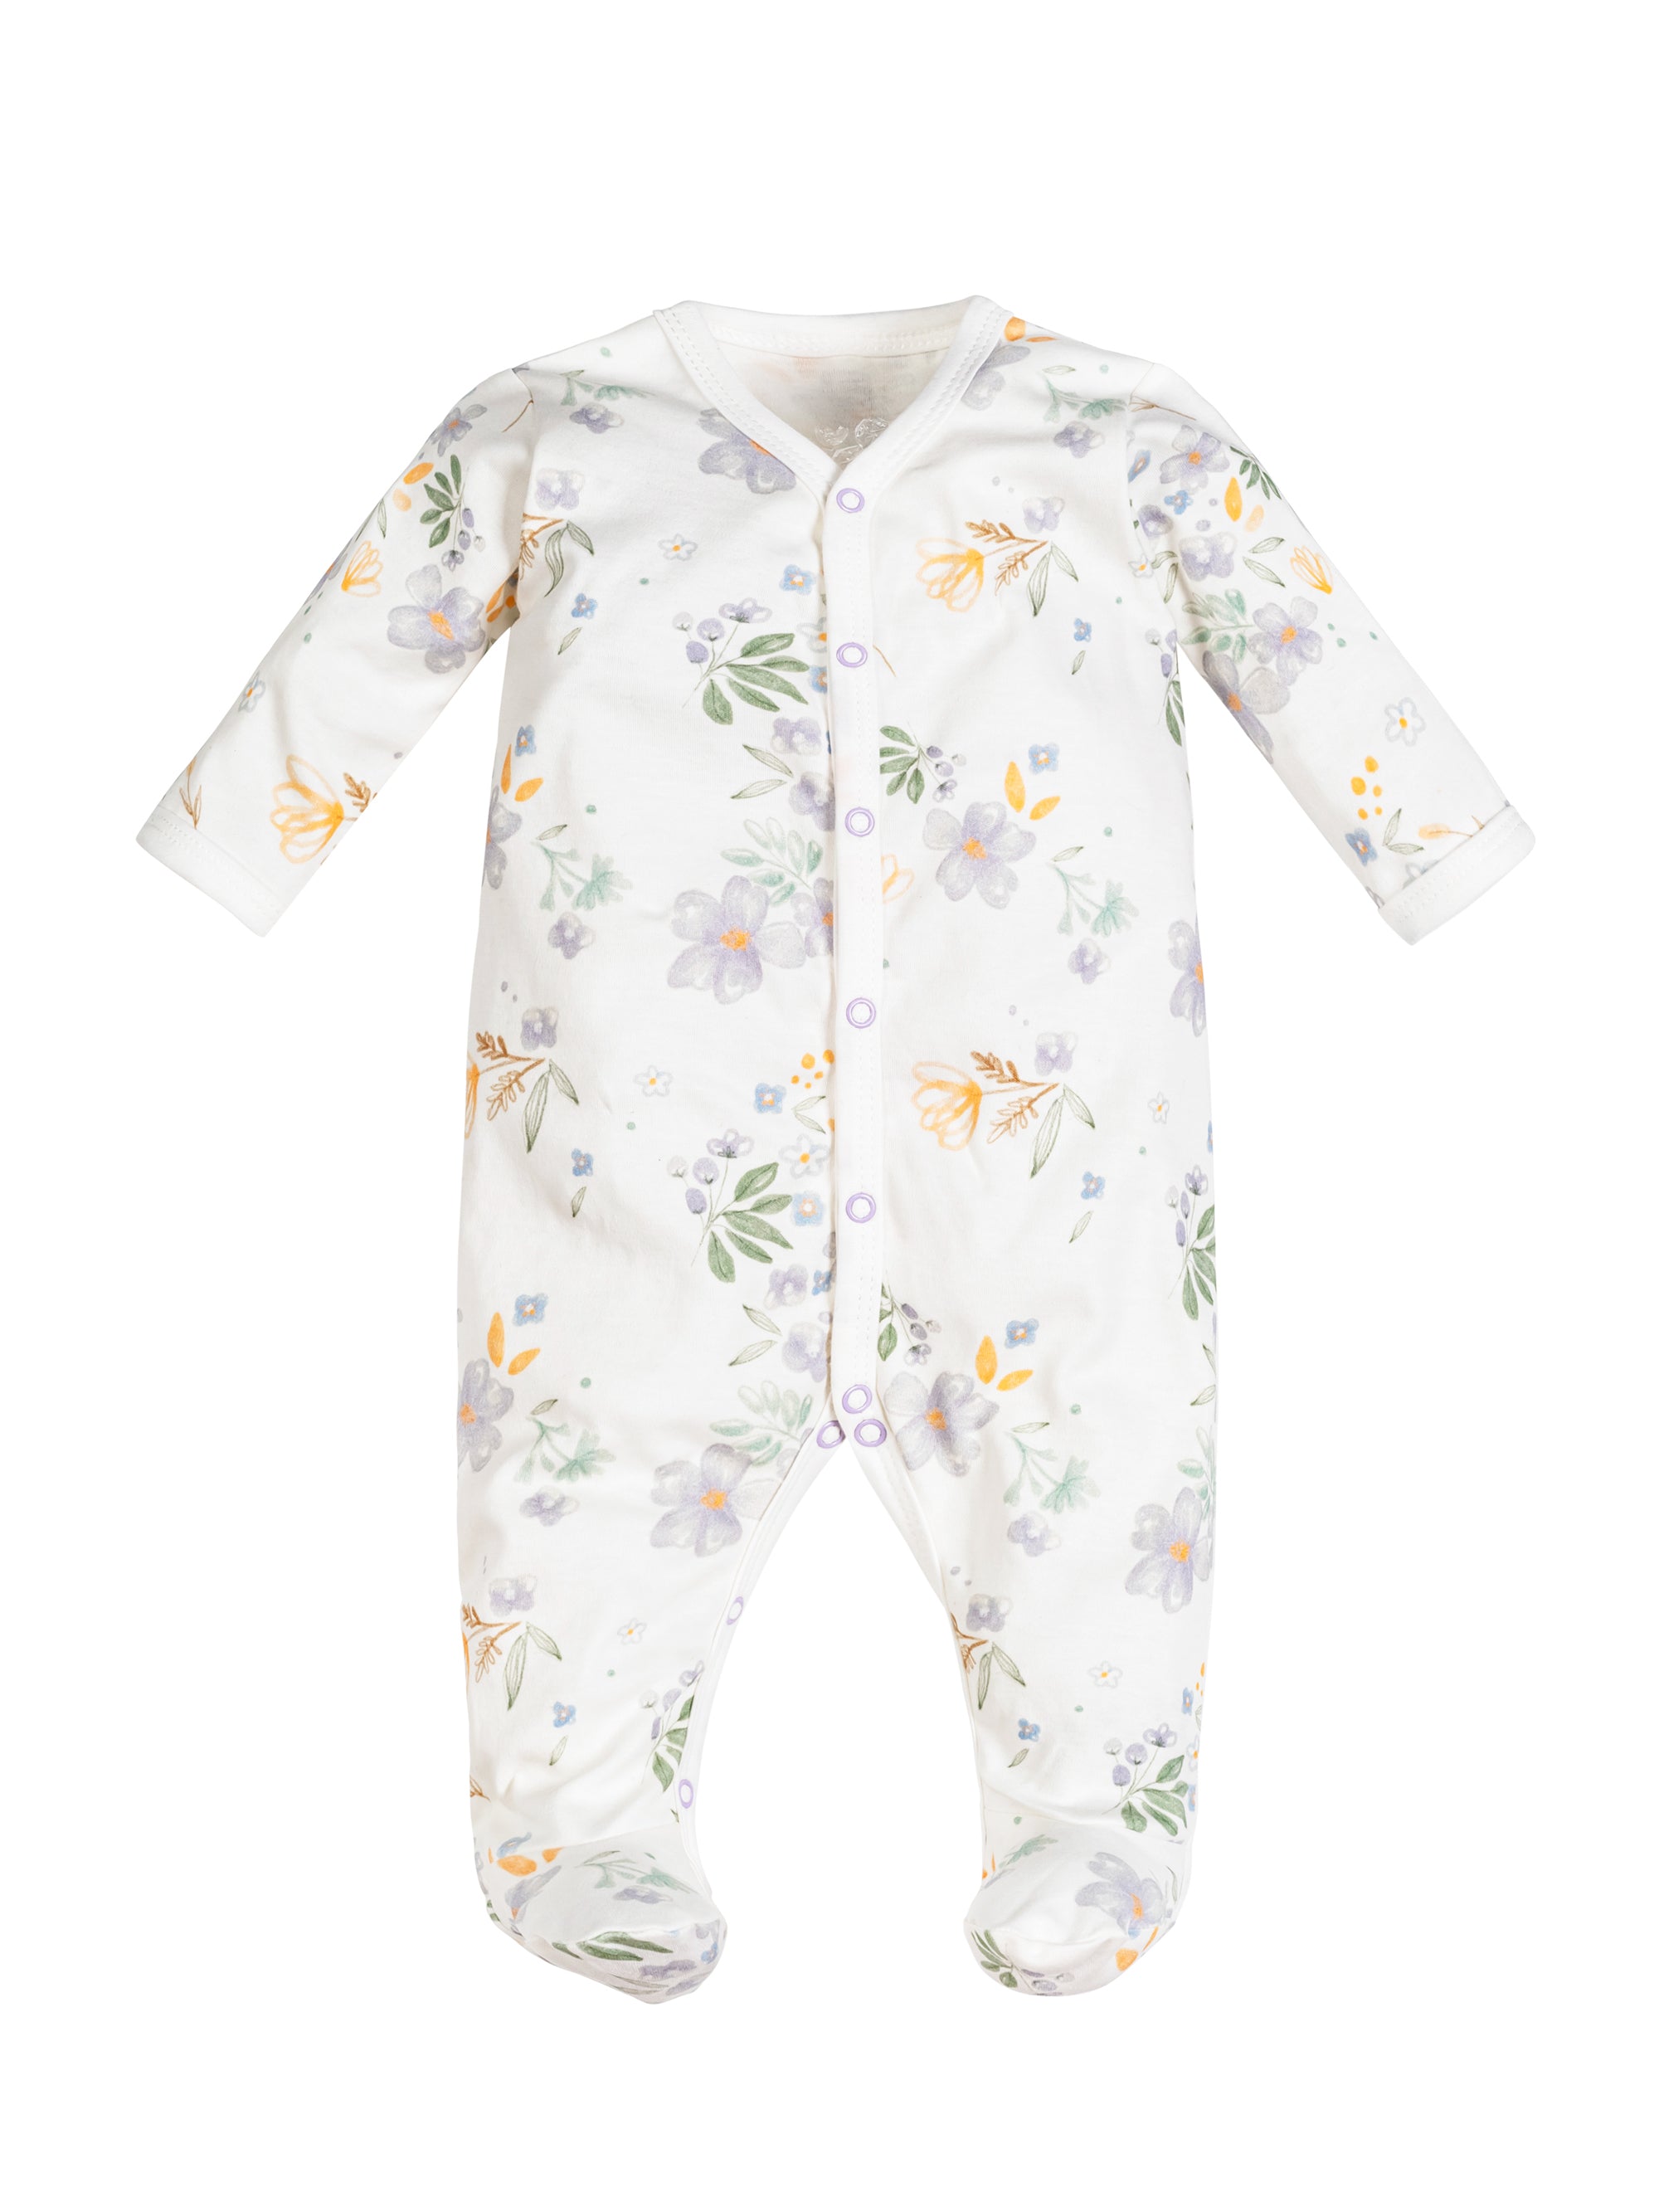 Snap Front Footie - Modern Daisy